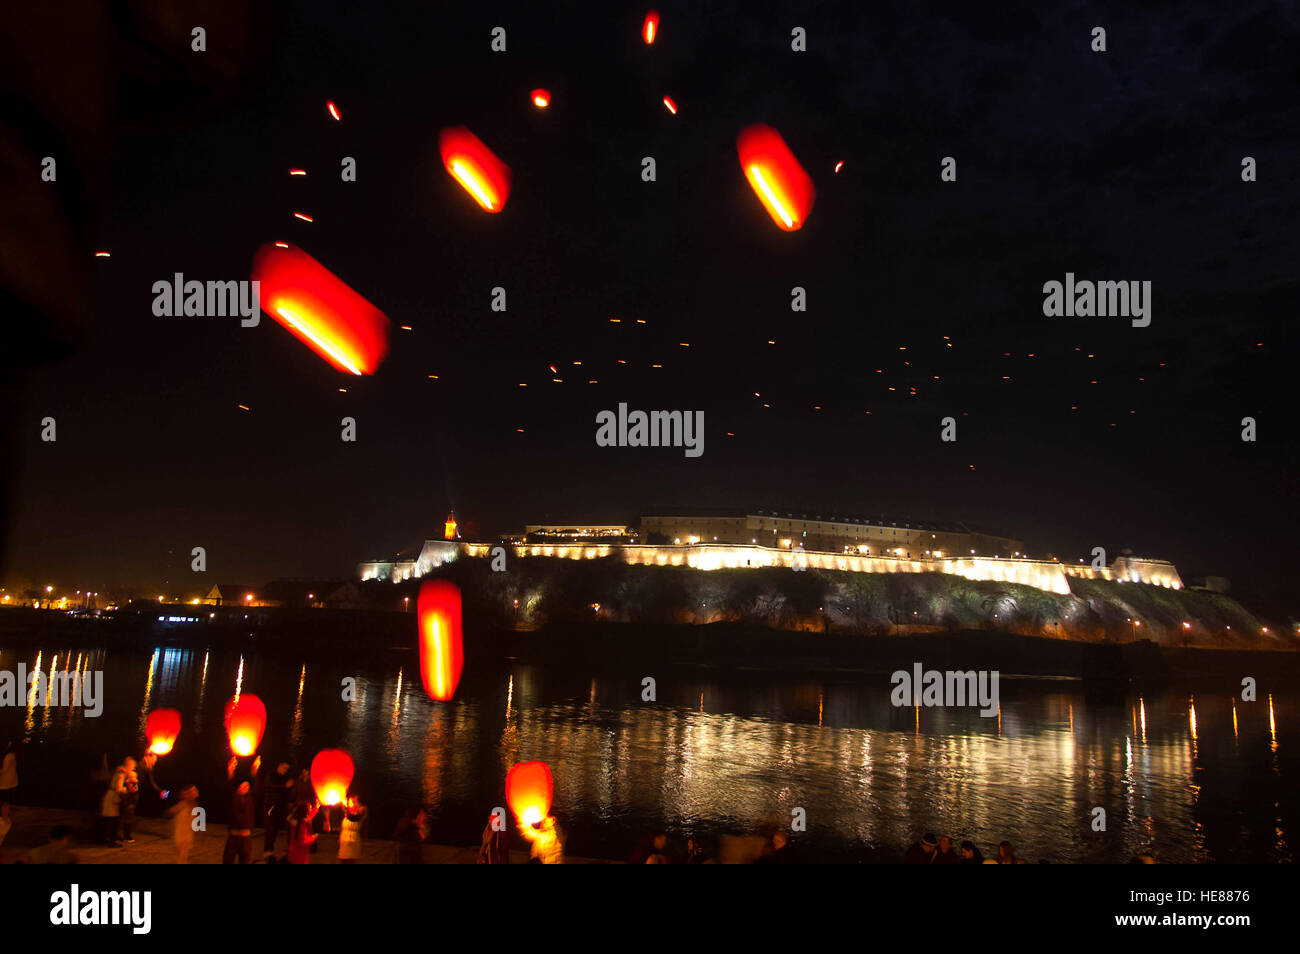 The release of Chinese wish lanterns over the Danube and the Petrovaradin fortress Stock Photo